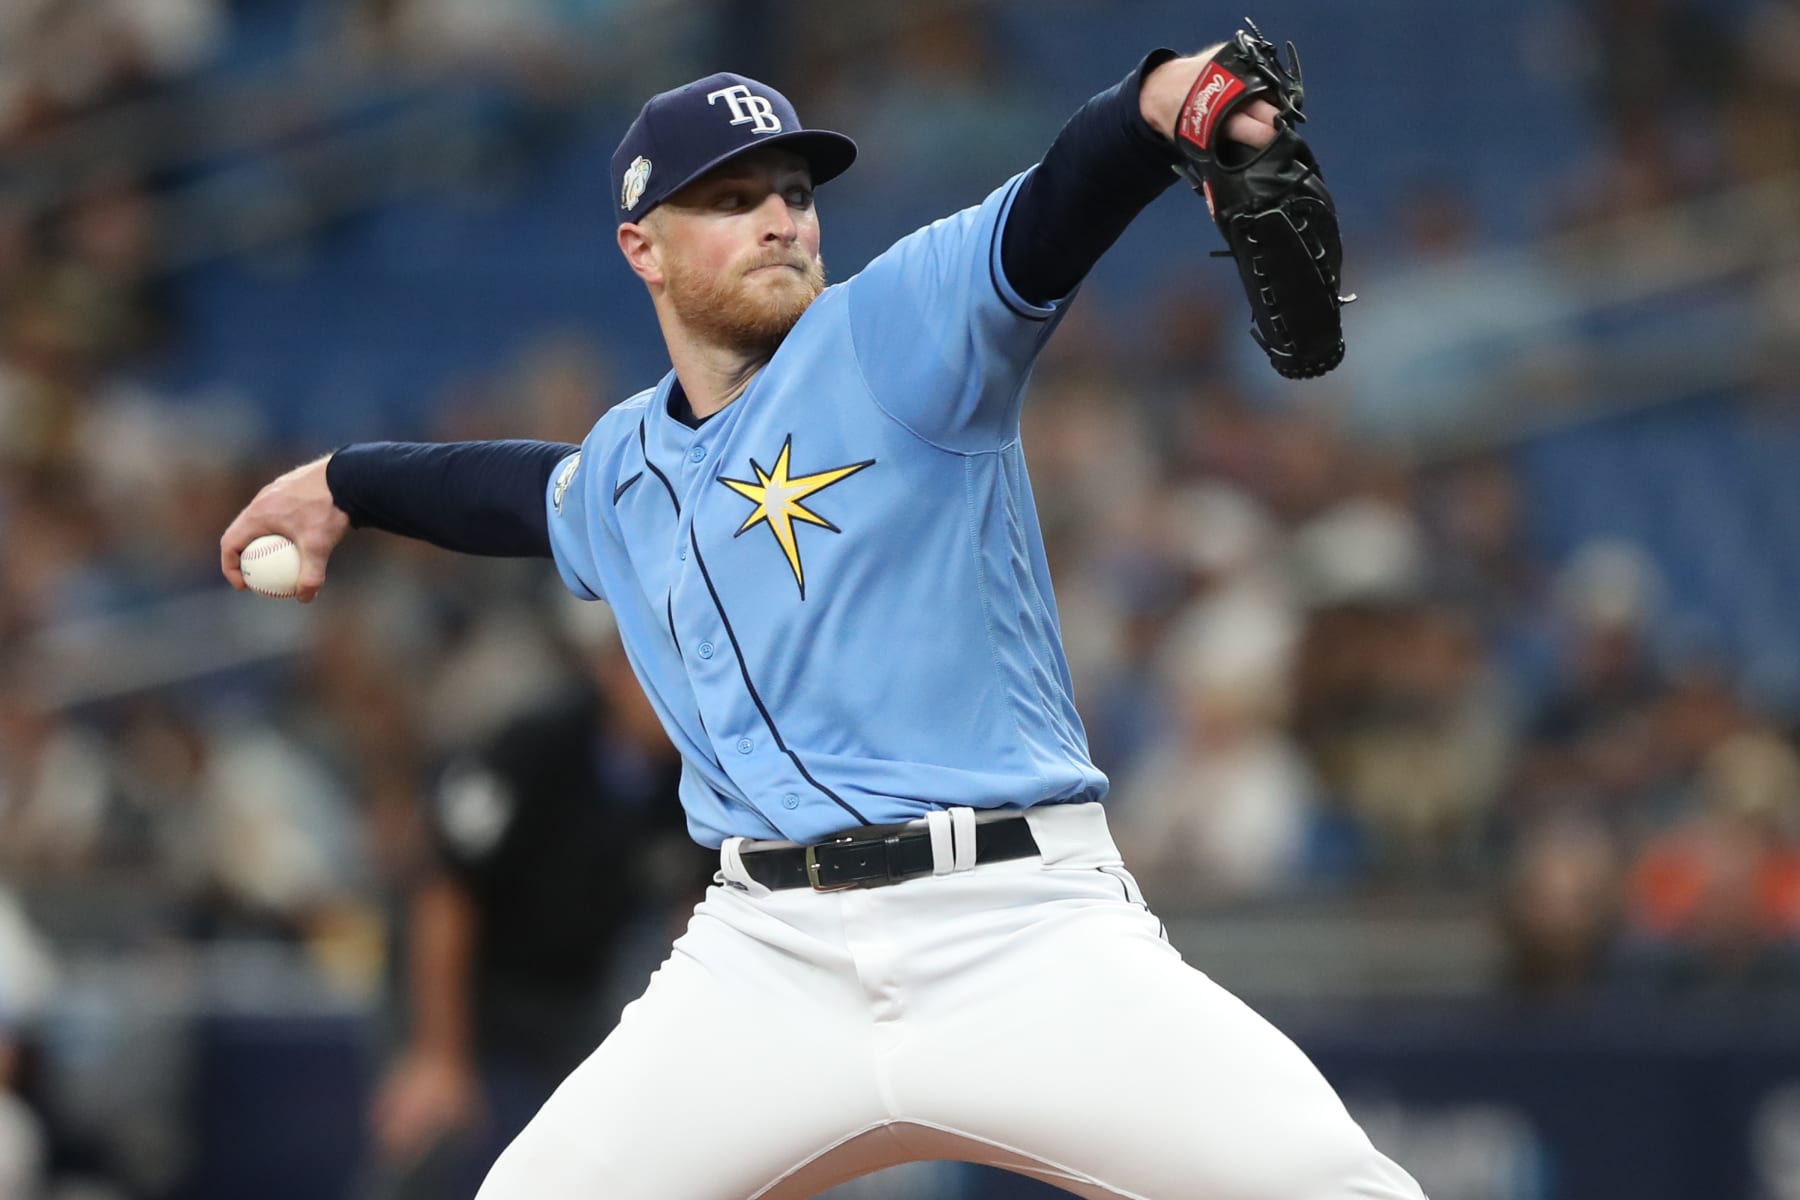 The Athletic on X: The Tampa Bay Rays are 10-0 to start this